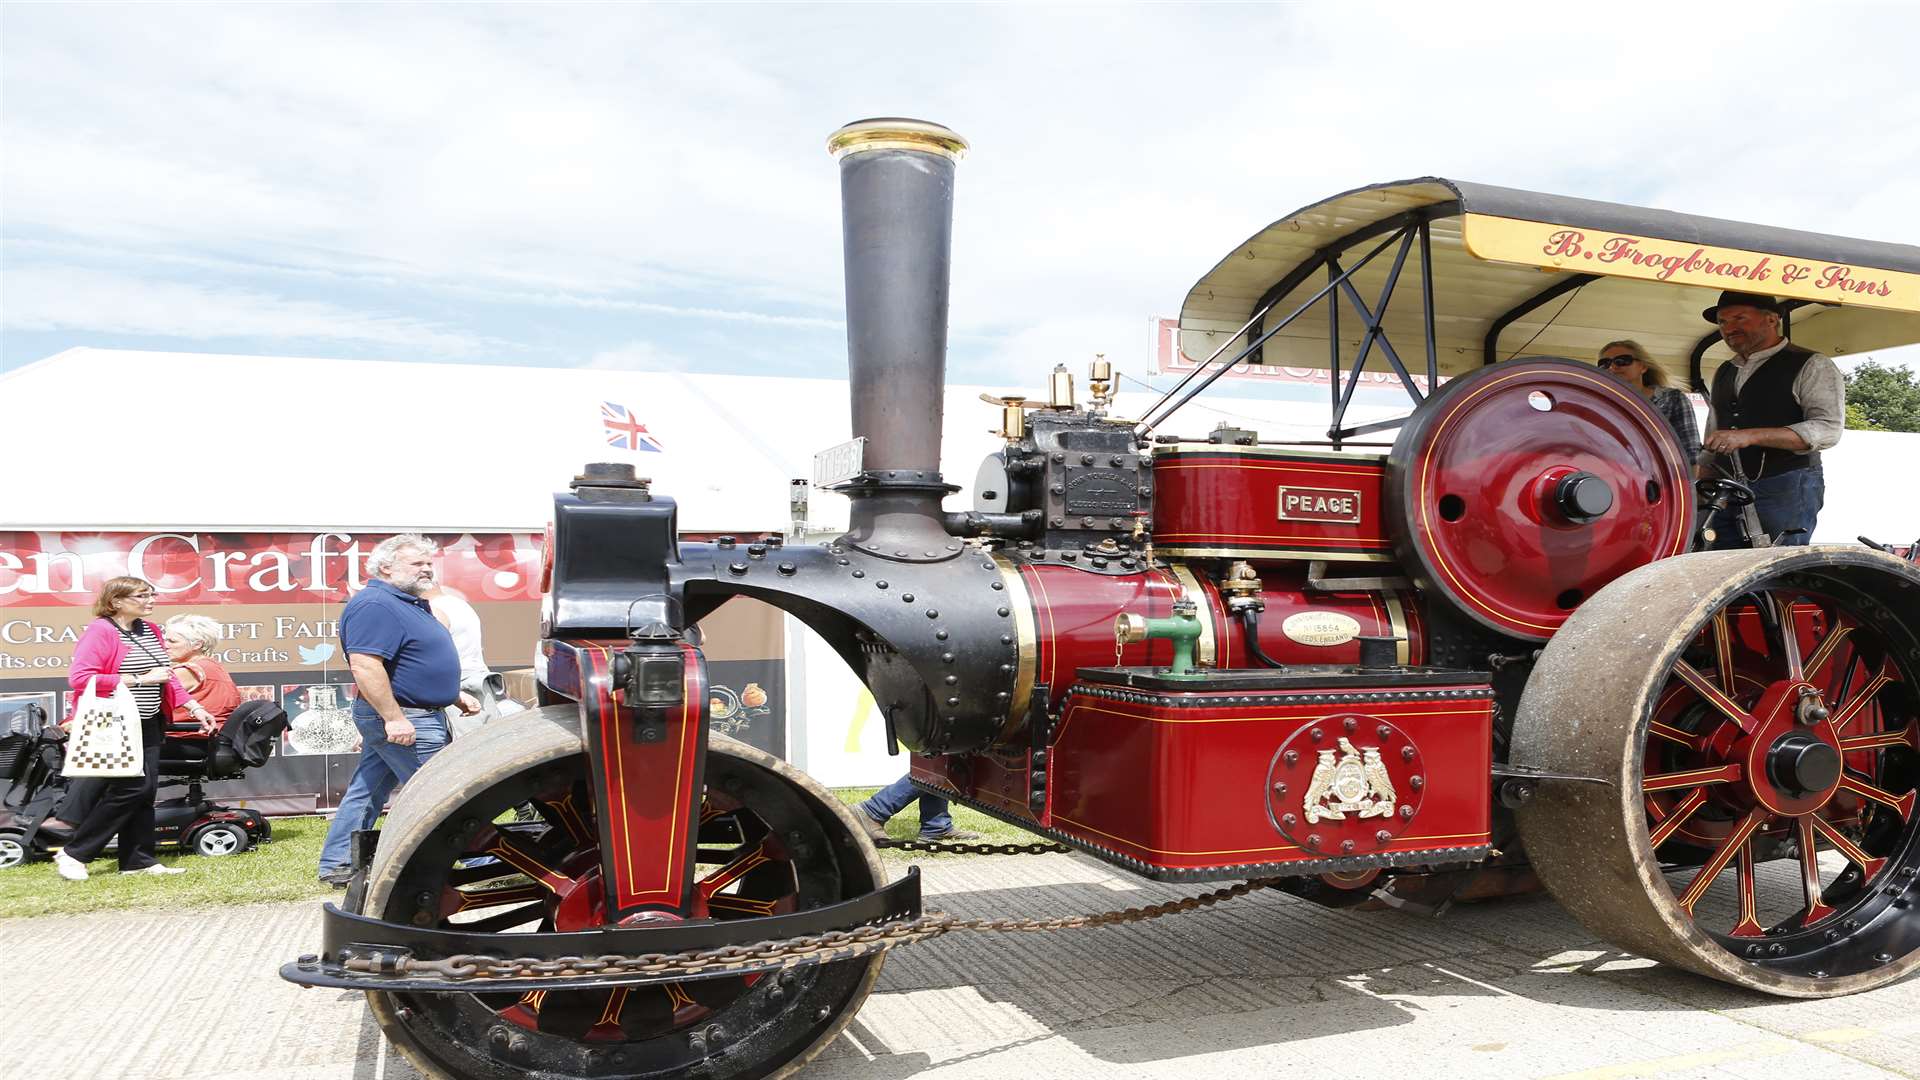 Visitors can see heritage vehicles in the Astor ring